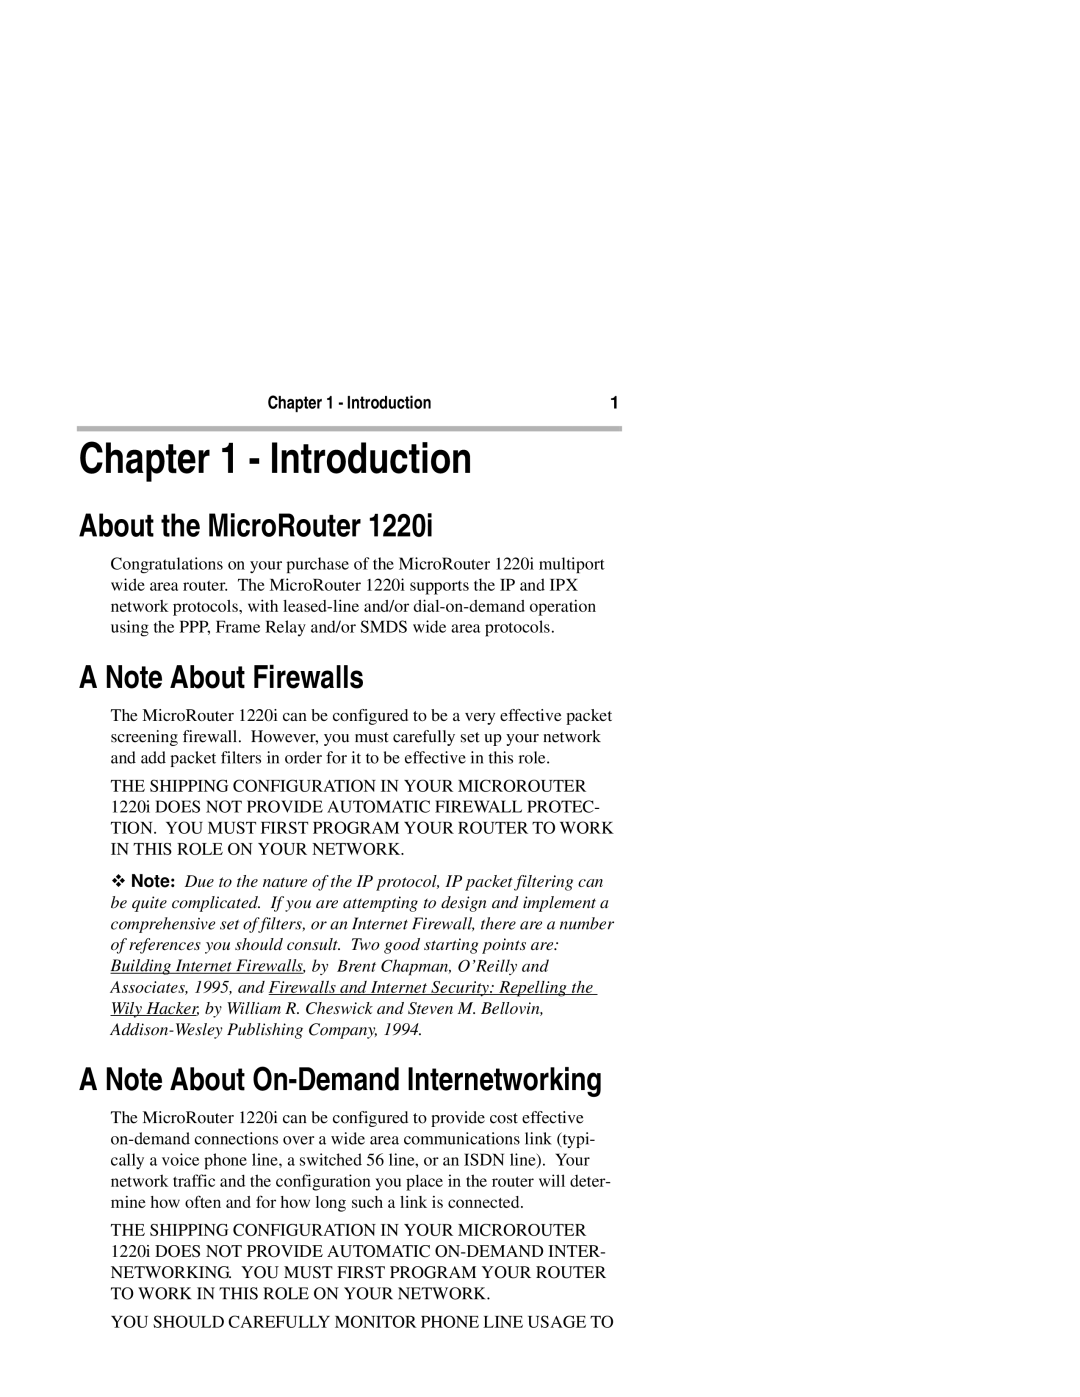 Compatible Systems 1220I manual Introduction, About the MicroRouter 